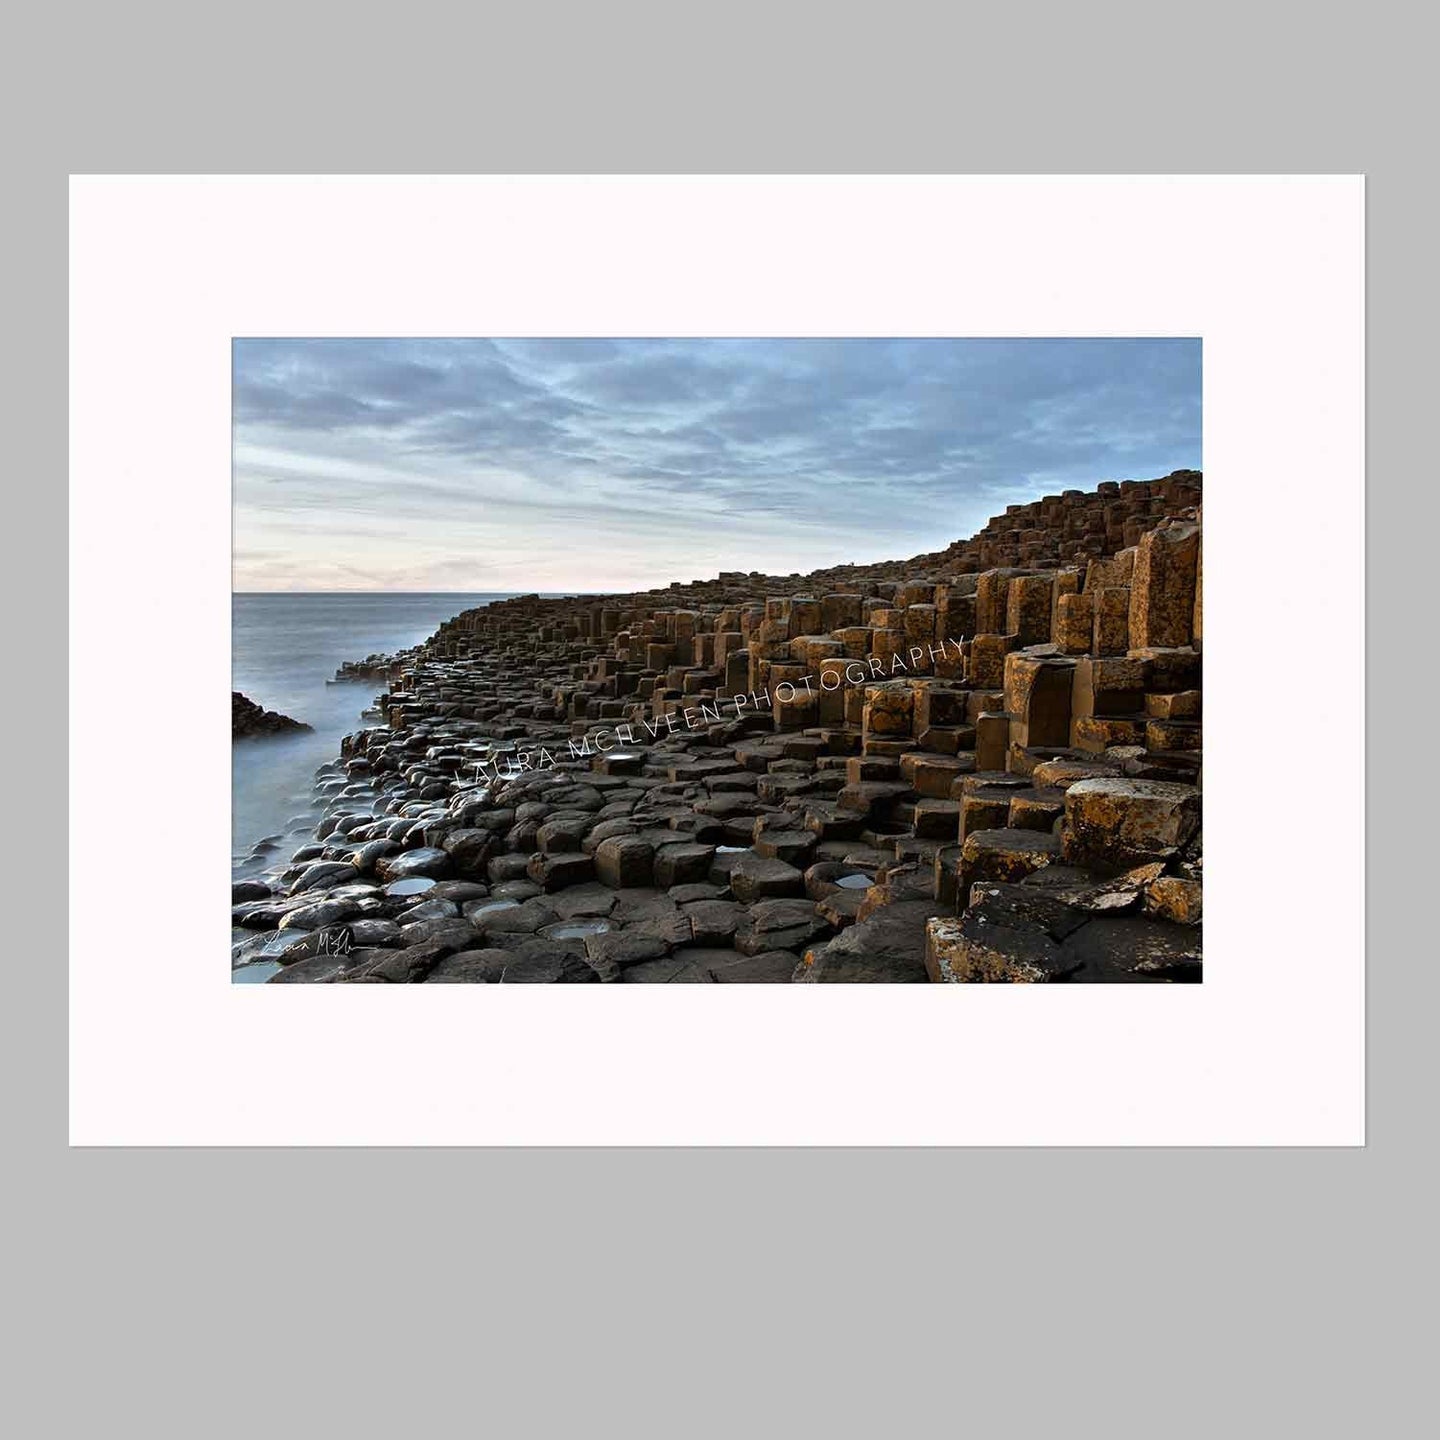 'Blue Hour At The Stones', The Giant's Causeway